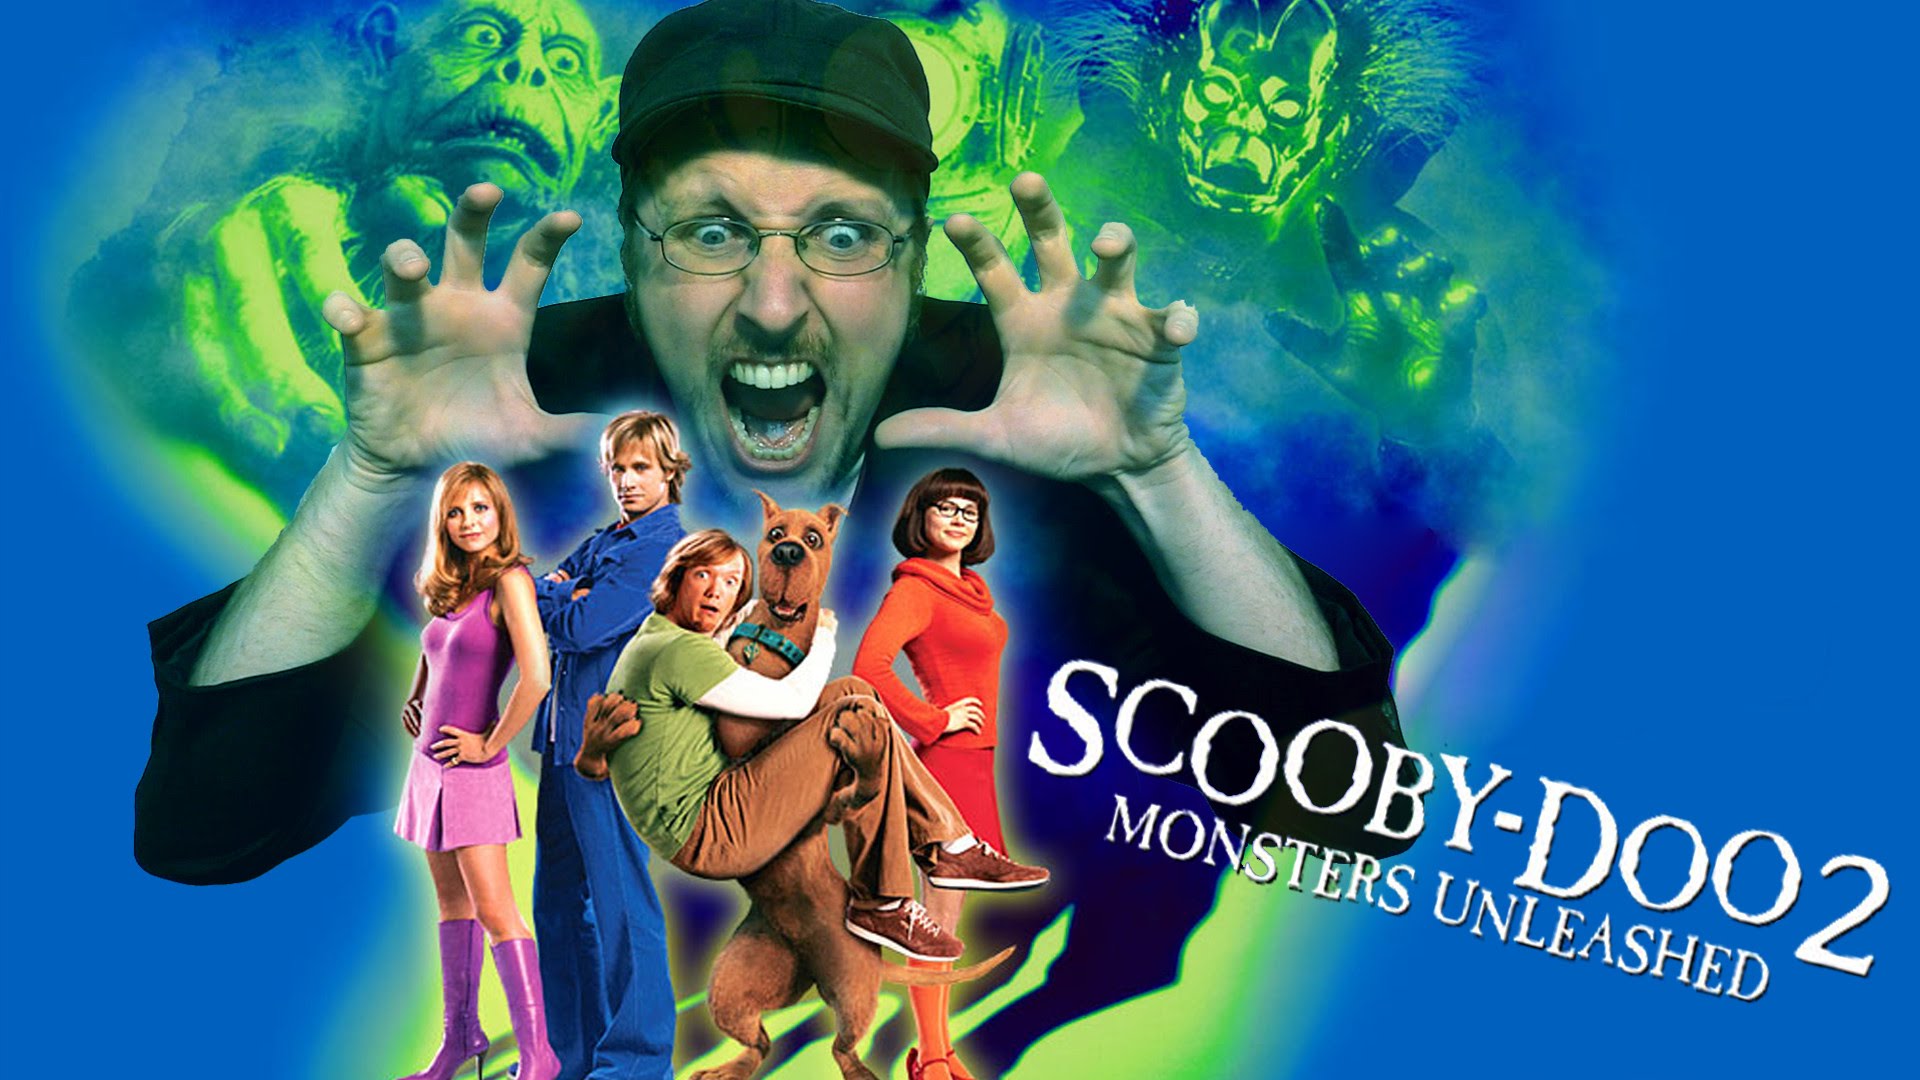 Whoa Scoob, Shaggy's gonna be like, the bad guy in a Five Nights at  Freddy's movie